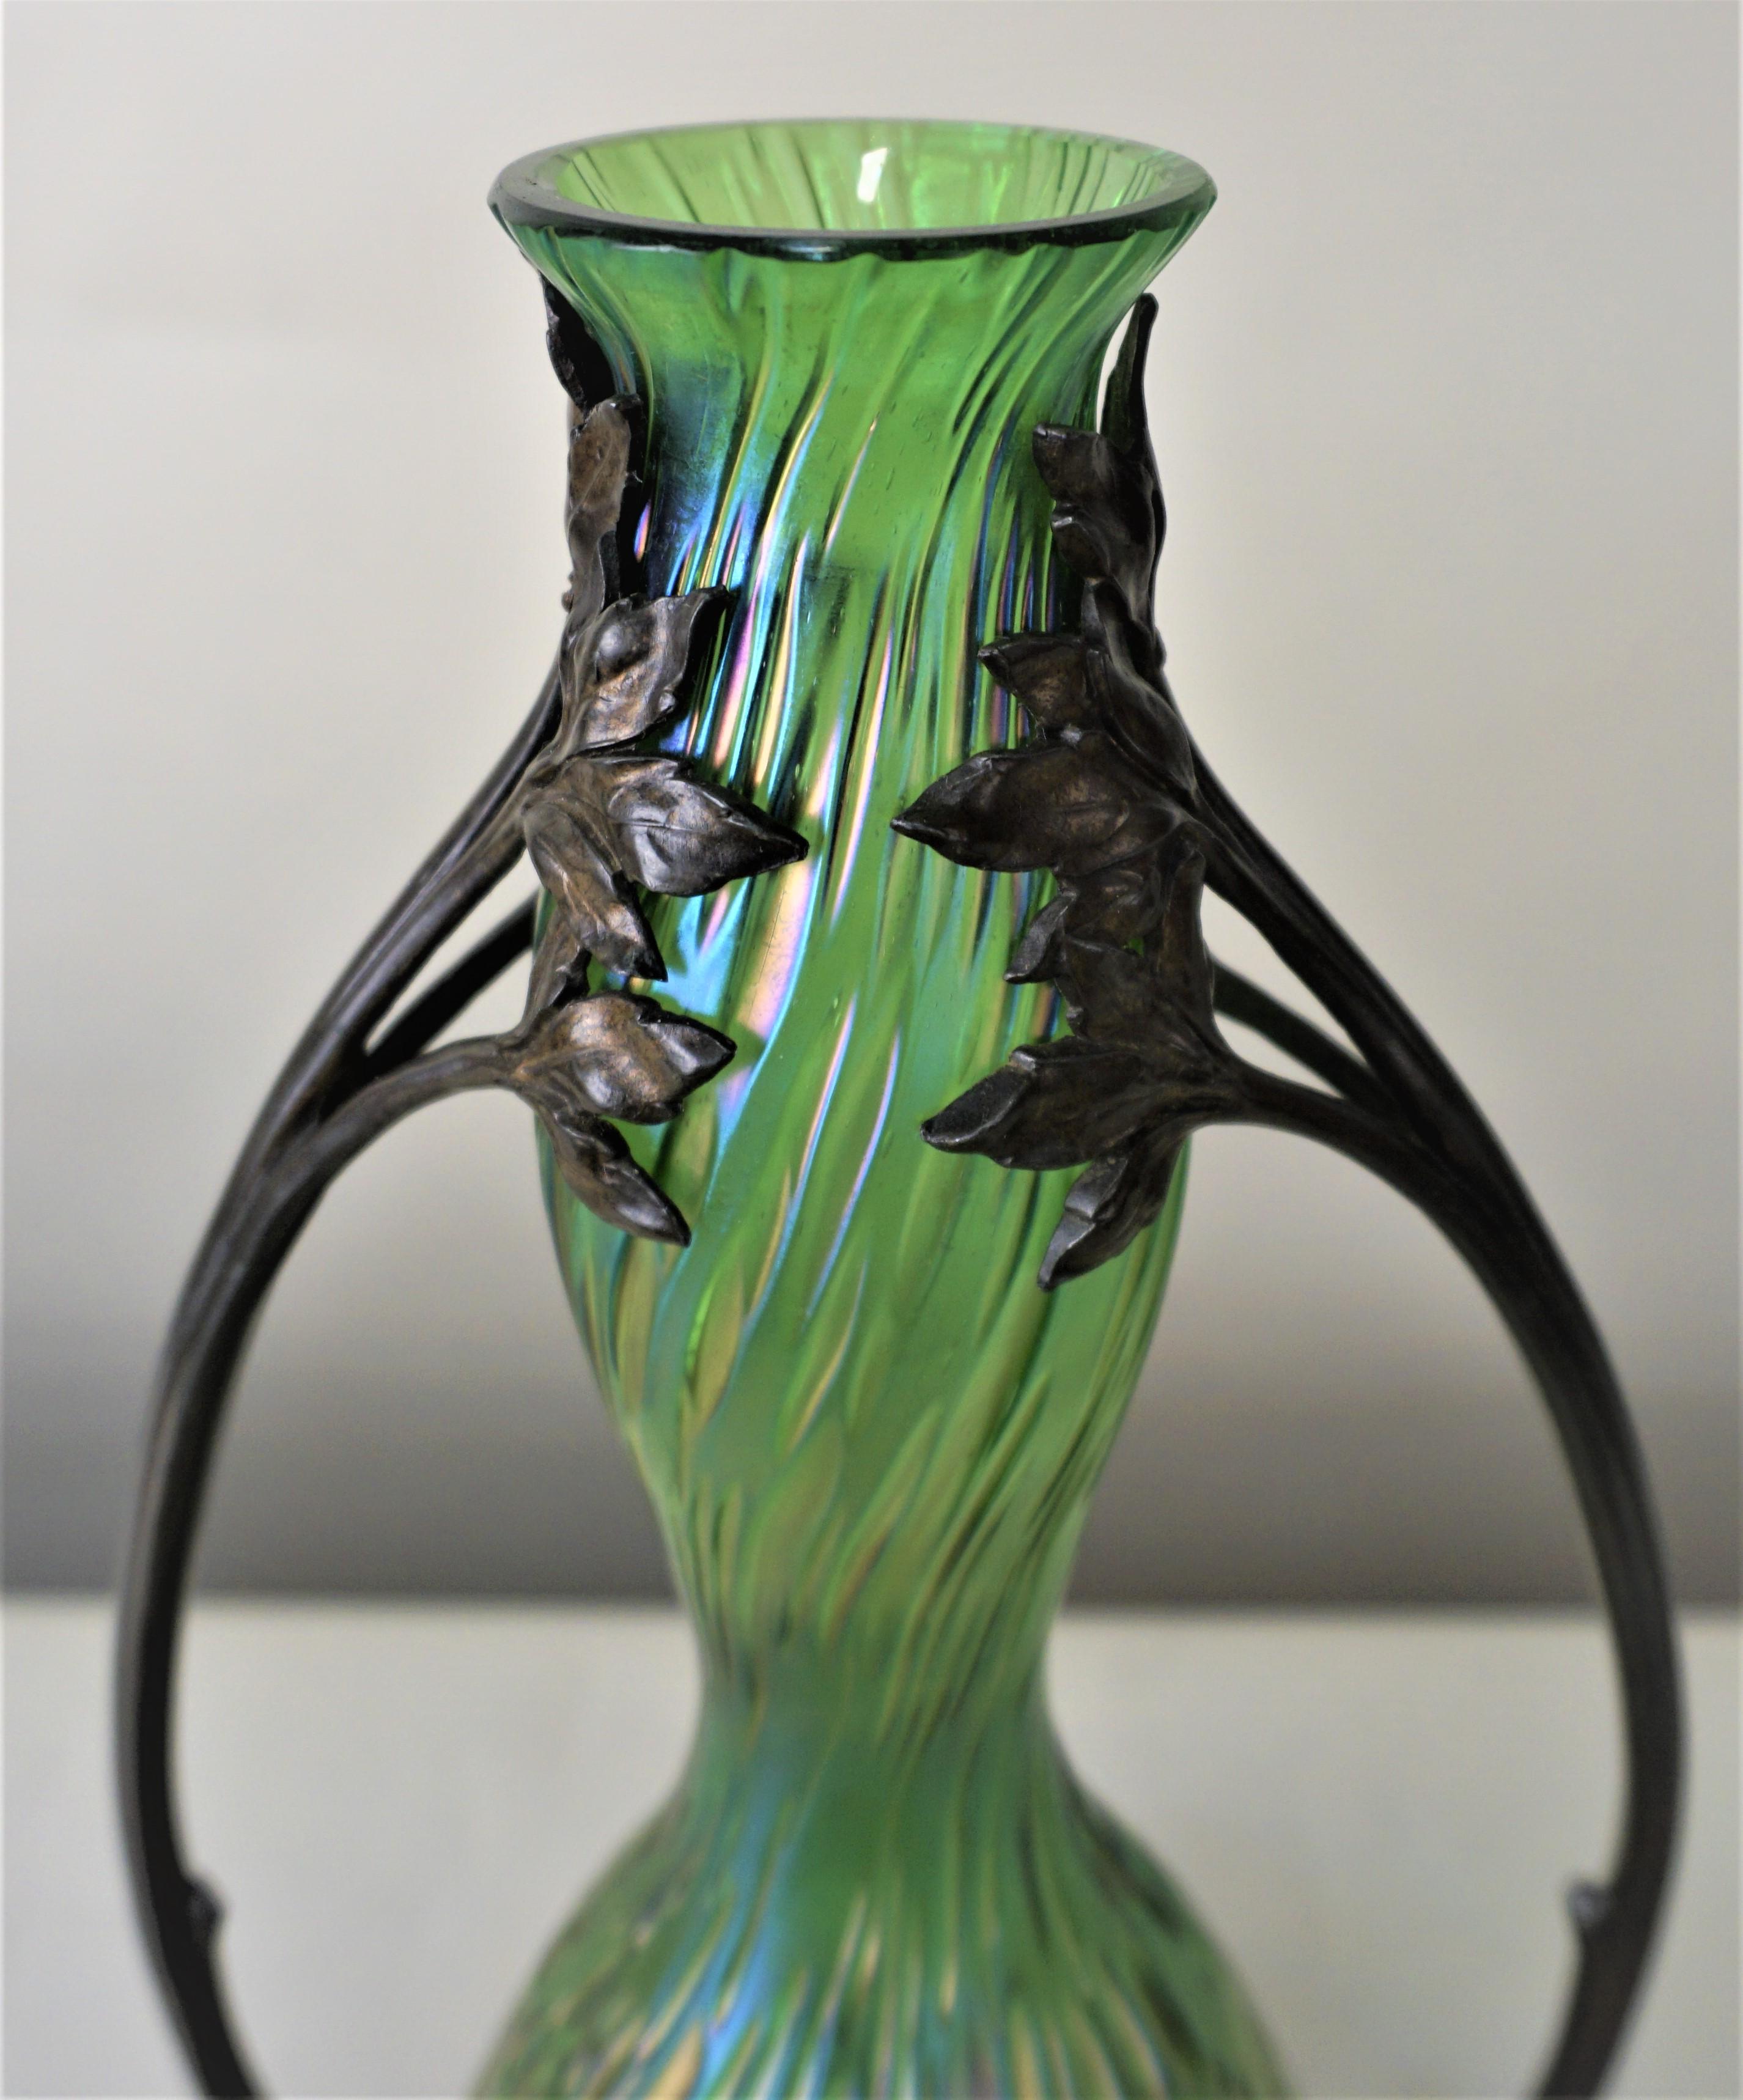 Loetz style Art Nouveau glass vase in pewter holder, iridescent glass vase with stylized leaves design on top of handles.